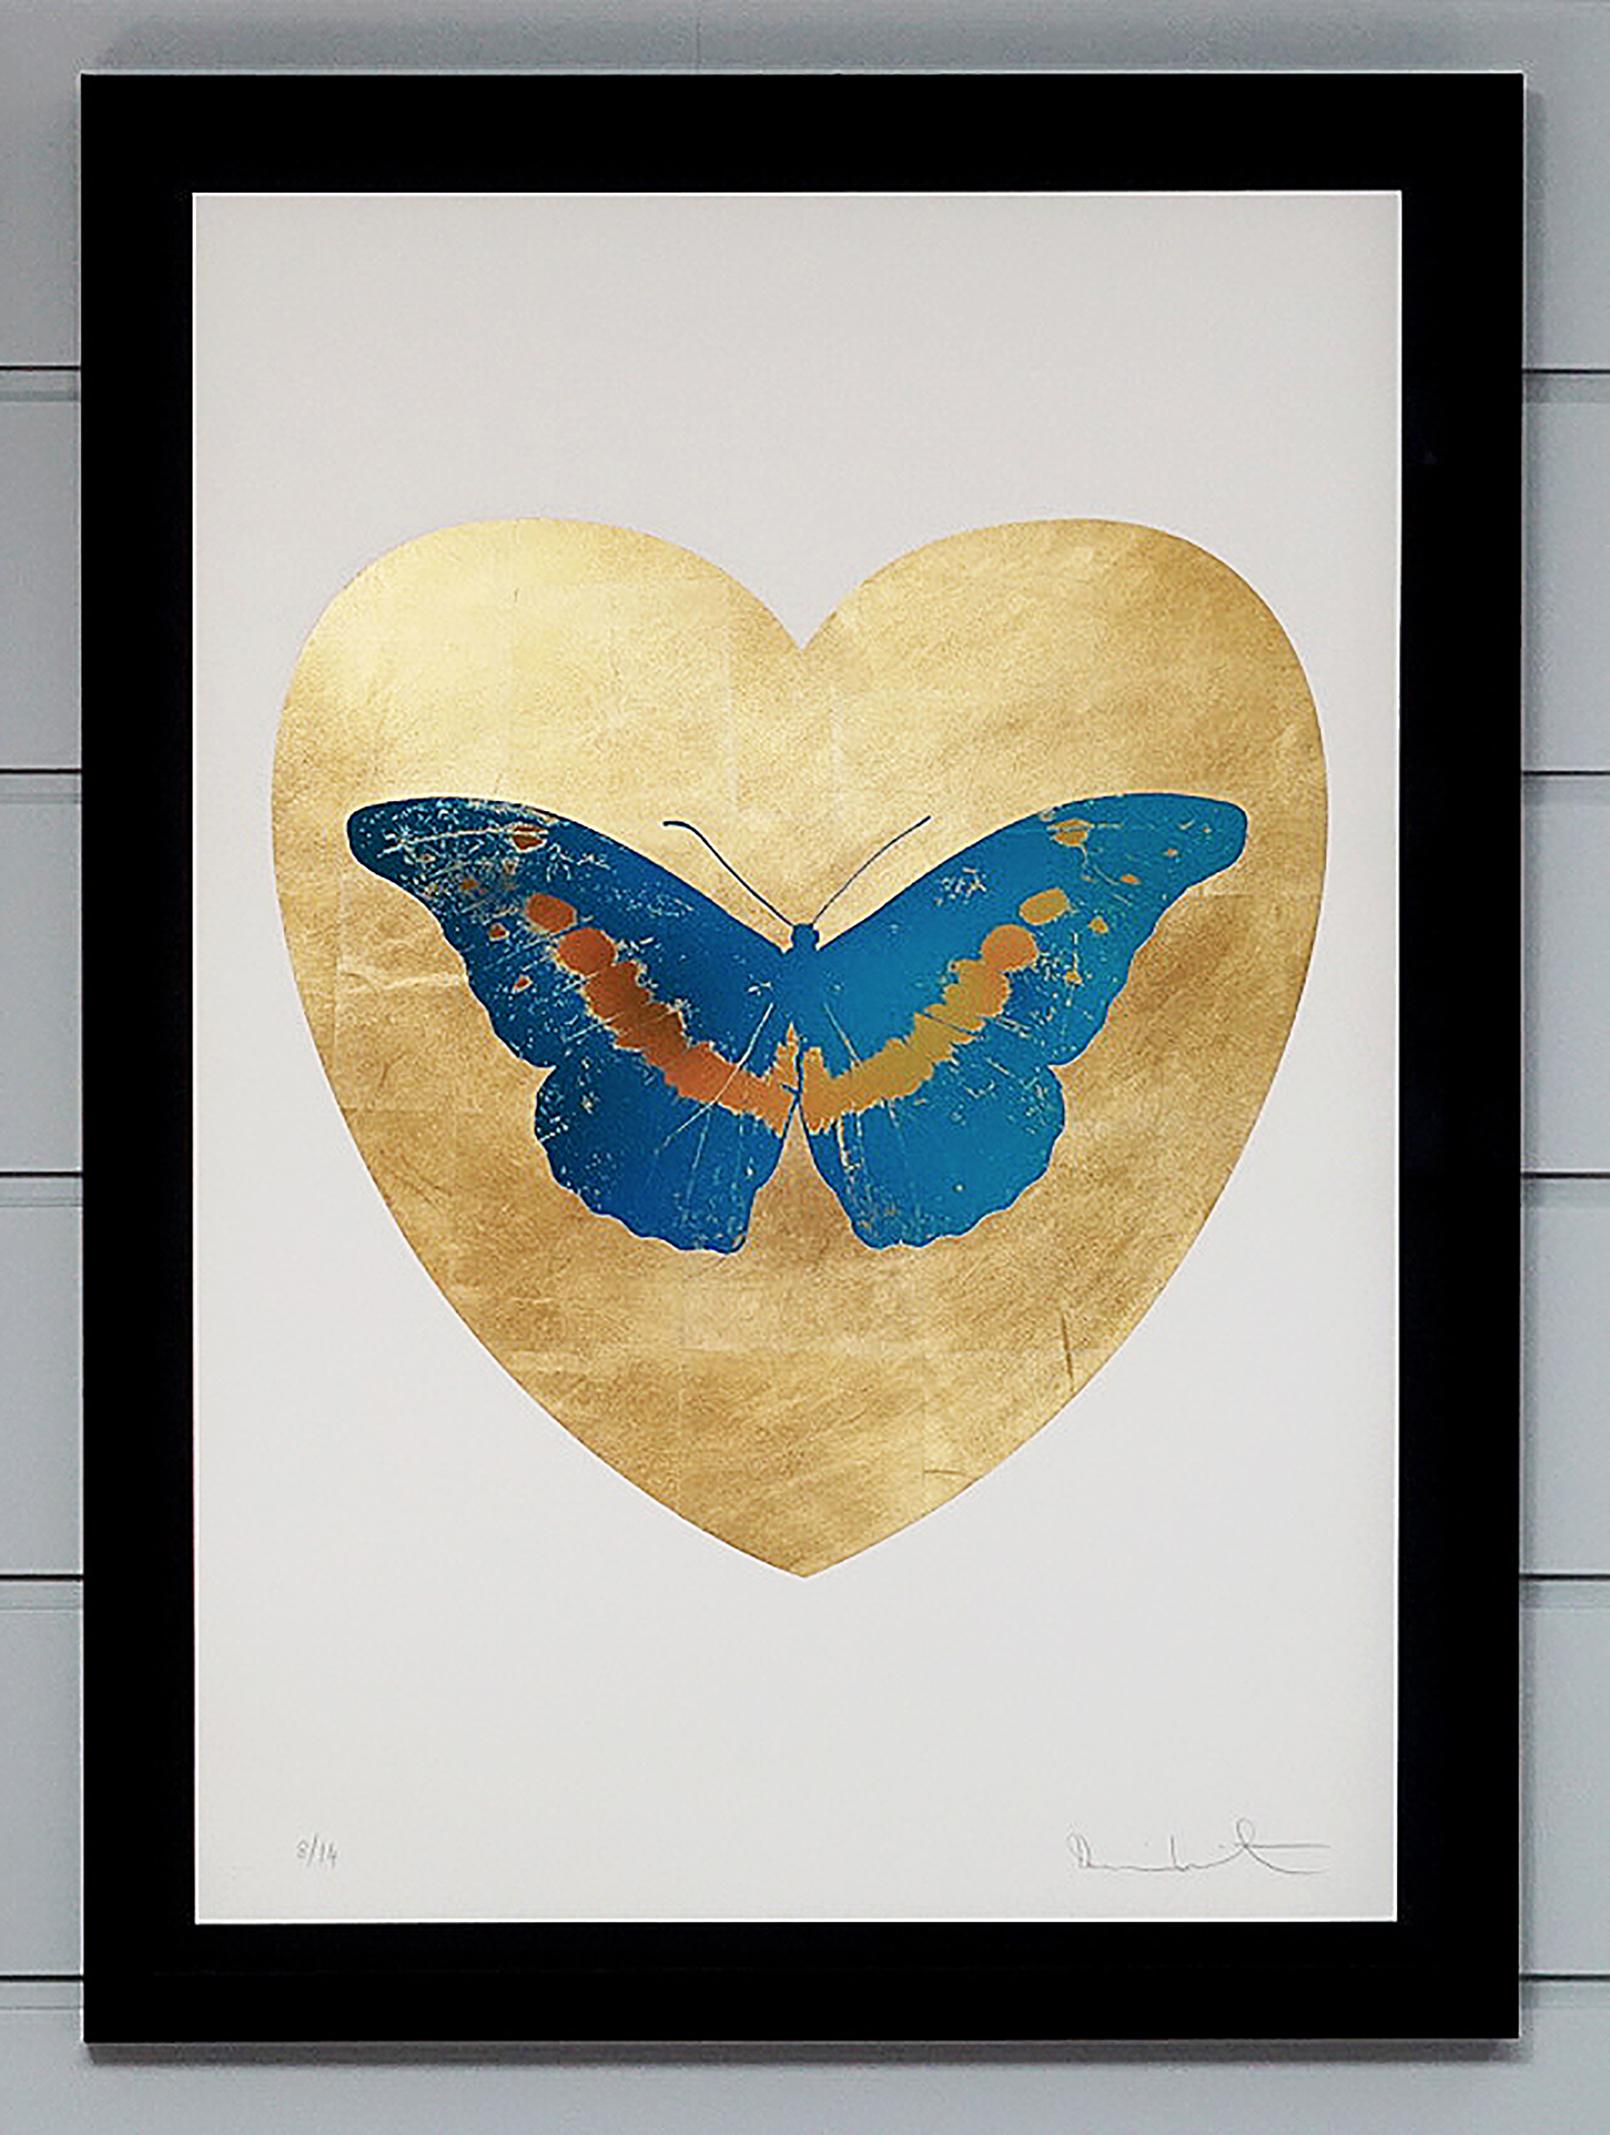 This series 'I Love You' is created in Damien Hirst's signature style using butterflies as a symbolism for the celebration of life. This work is a part of small edition of 14 works. Signed by the Artist. The artwork comes in a custom black lacquer